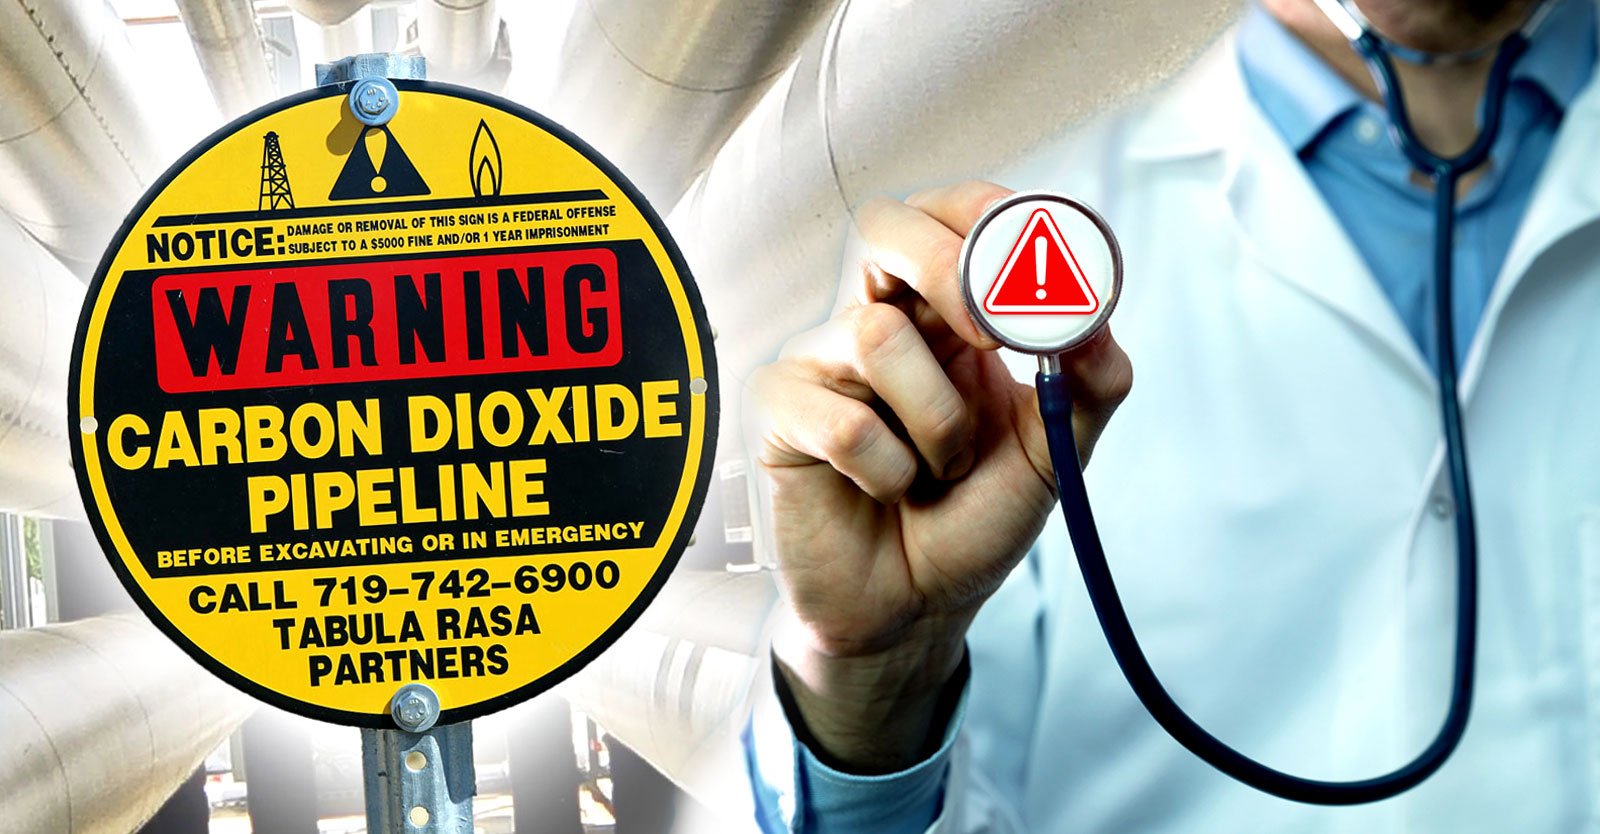 Zombie Symptoms Linked to CO2 Pipeline Leaks, But Big Energy Planning 96,000-Mile Expansion  Children’s Health Defense [Video]